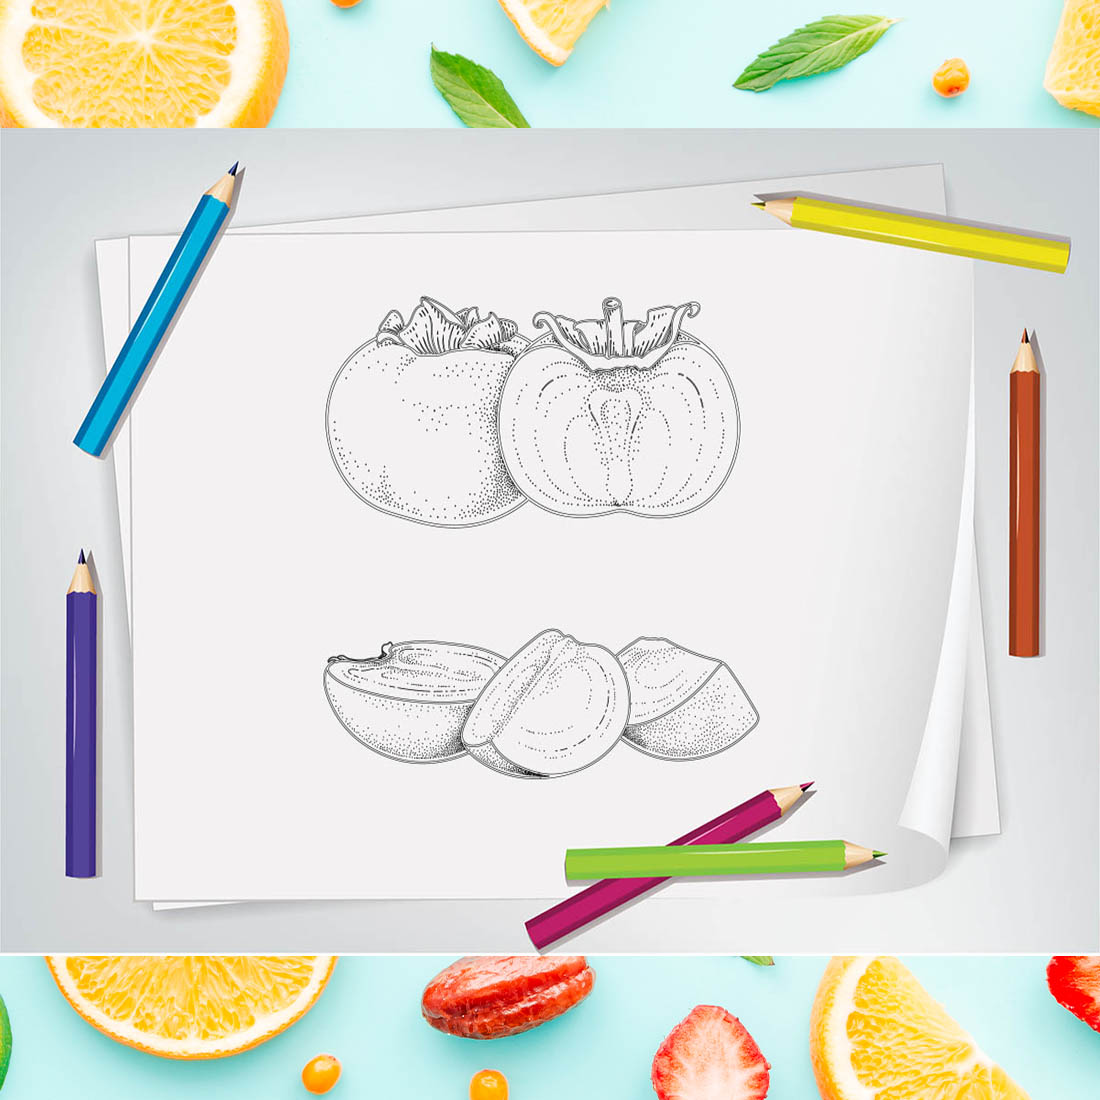 KDP Fruit & Vegetables Coloring Page cover image.